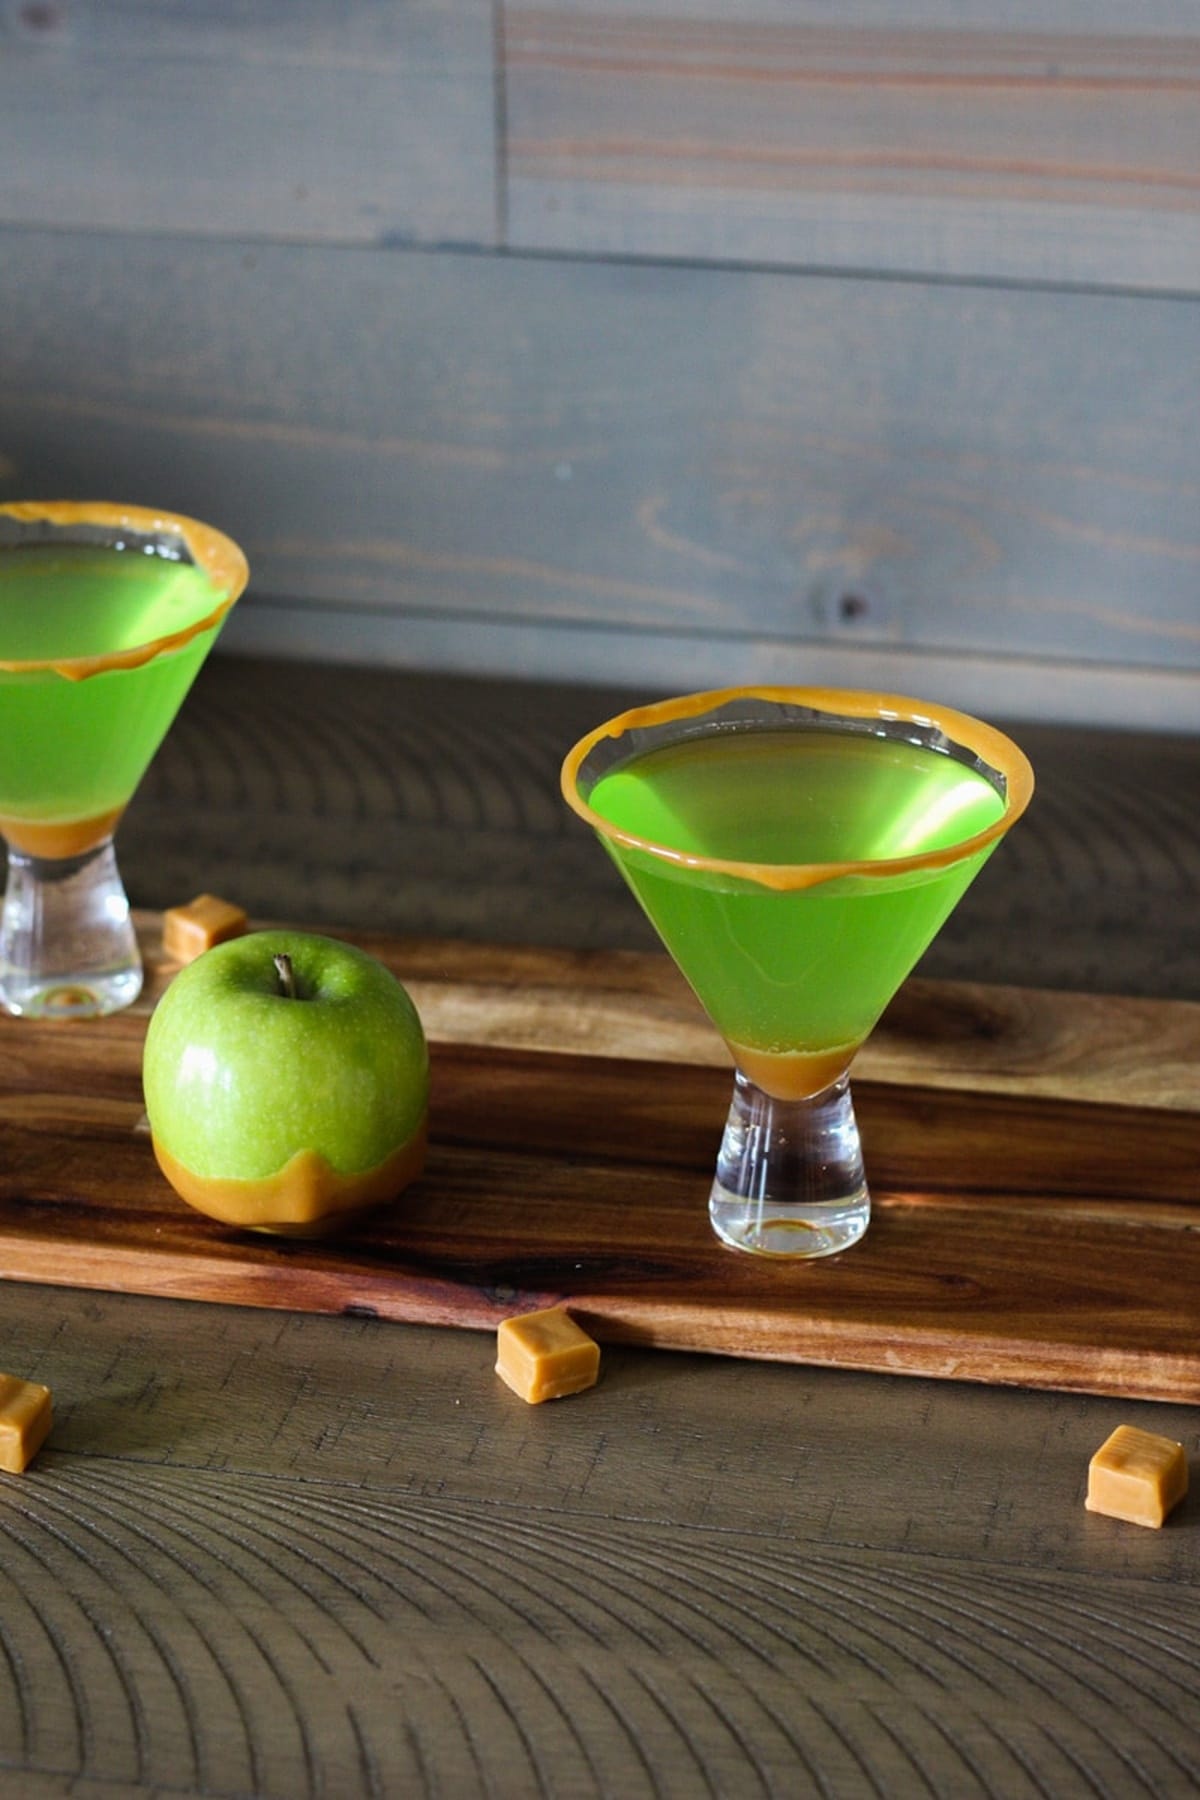 A glass of caramel apple martini on a table.